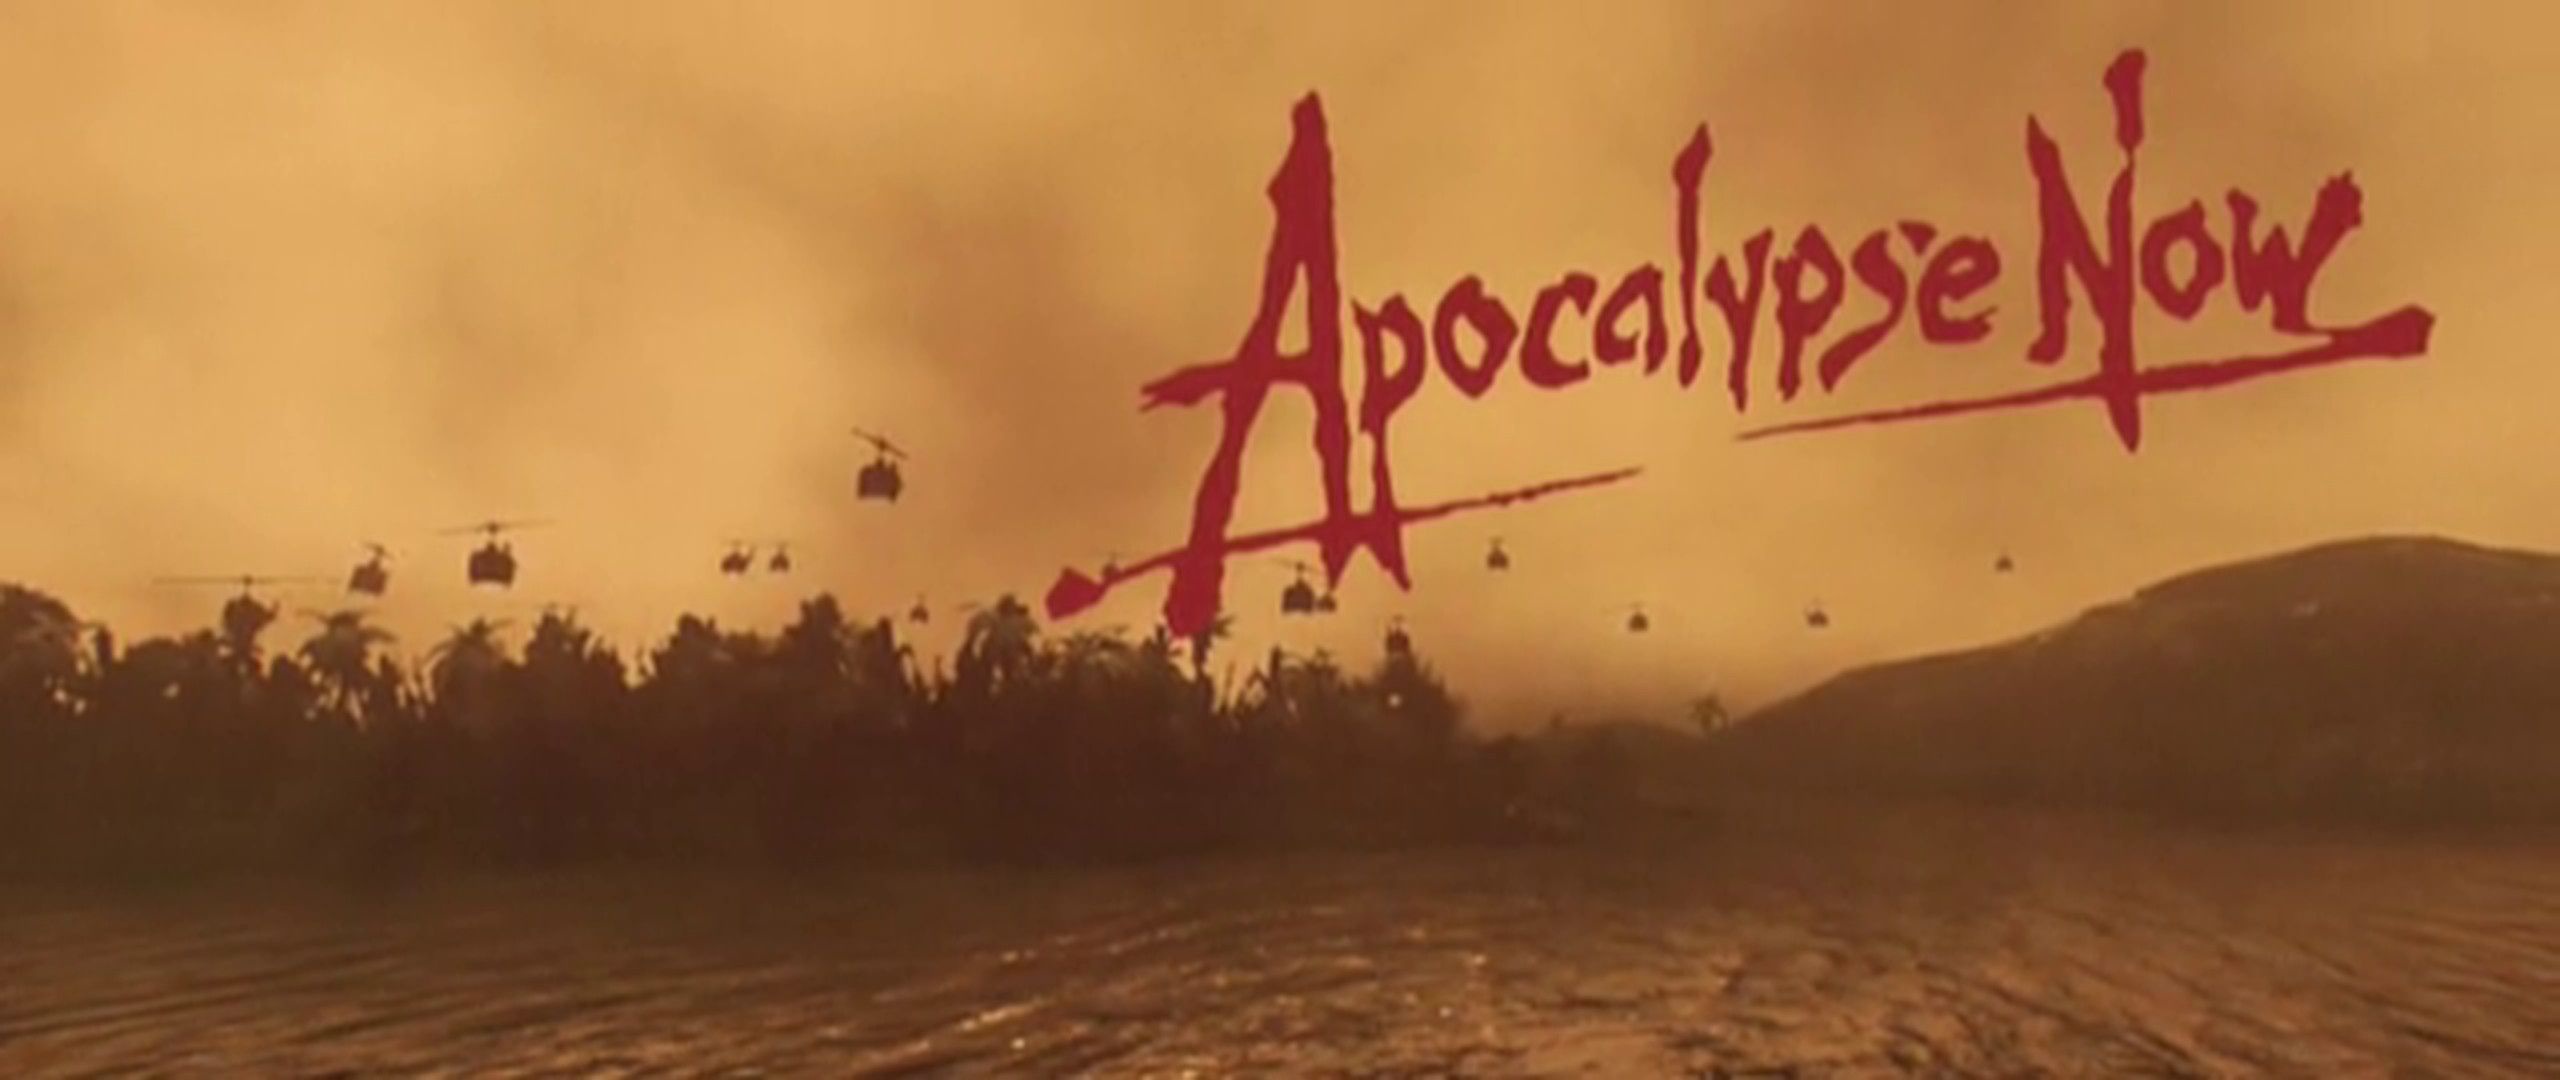 Francis Ford Coppola, Apocalypse Now Wallpapers, Movie Backgrounds, 2560x1080 Dual Screen Desktop